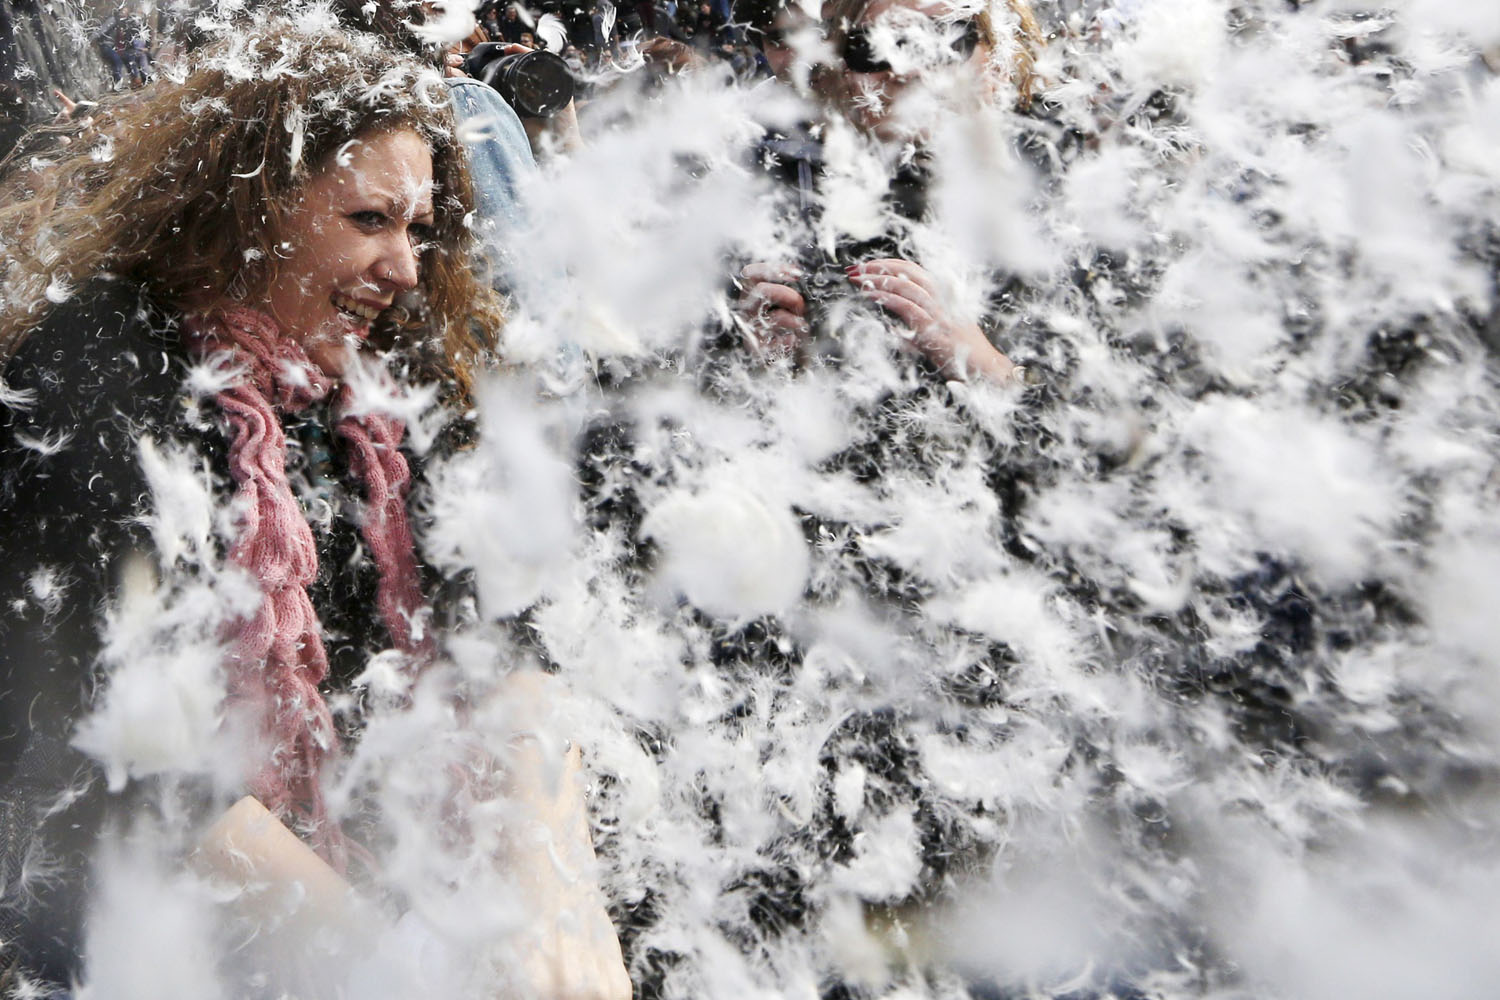 Participants join a mass pillow fight in Trafalgar Square in central London